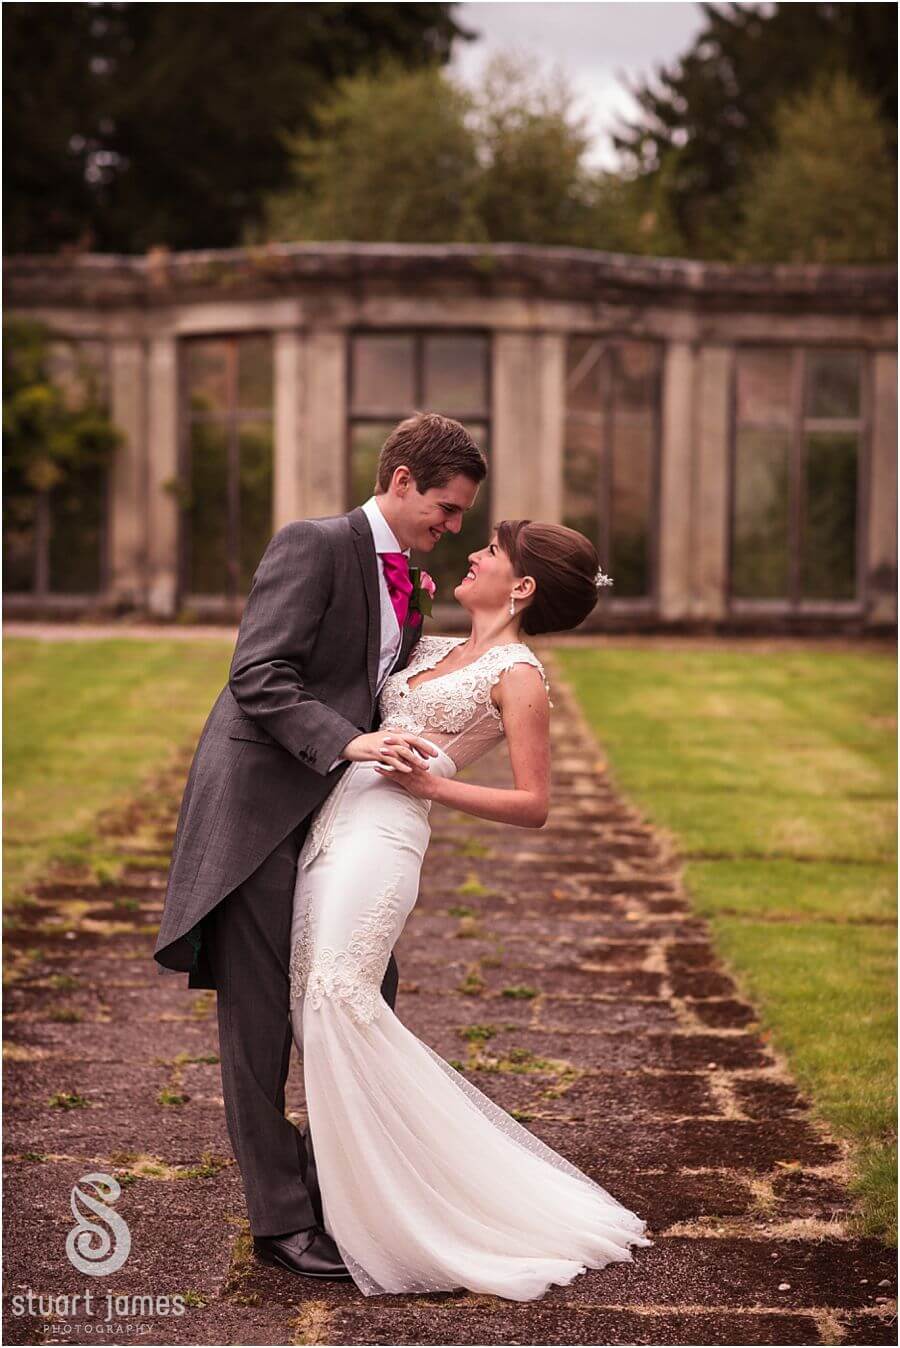 Relaxed beautiful wedding photographs of the Bride and Groom around the grounds at Sandon Hall near Stafford by Stafford Wedding Photographer Stuart James